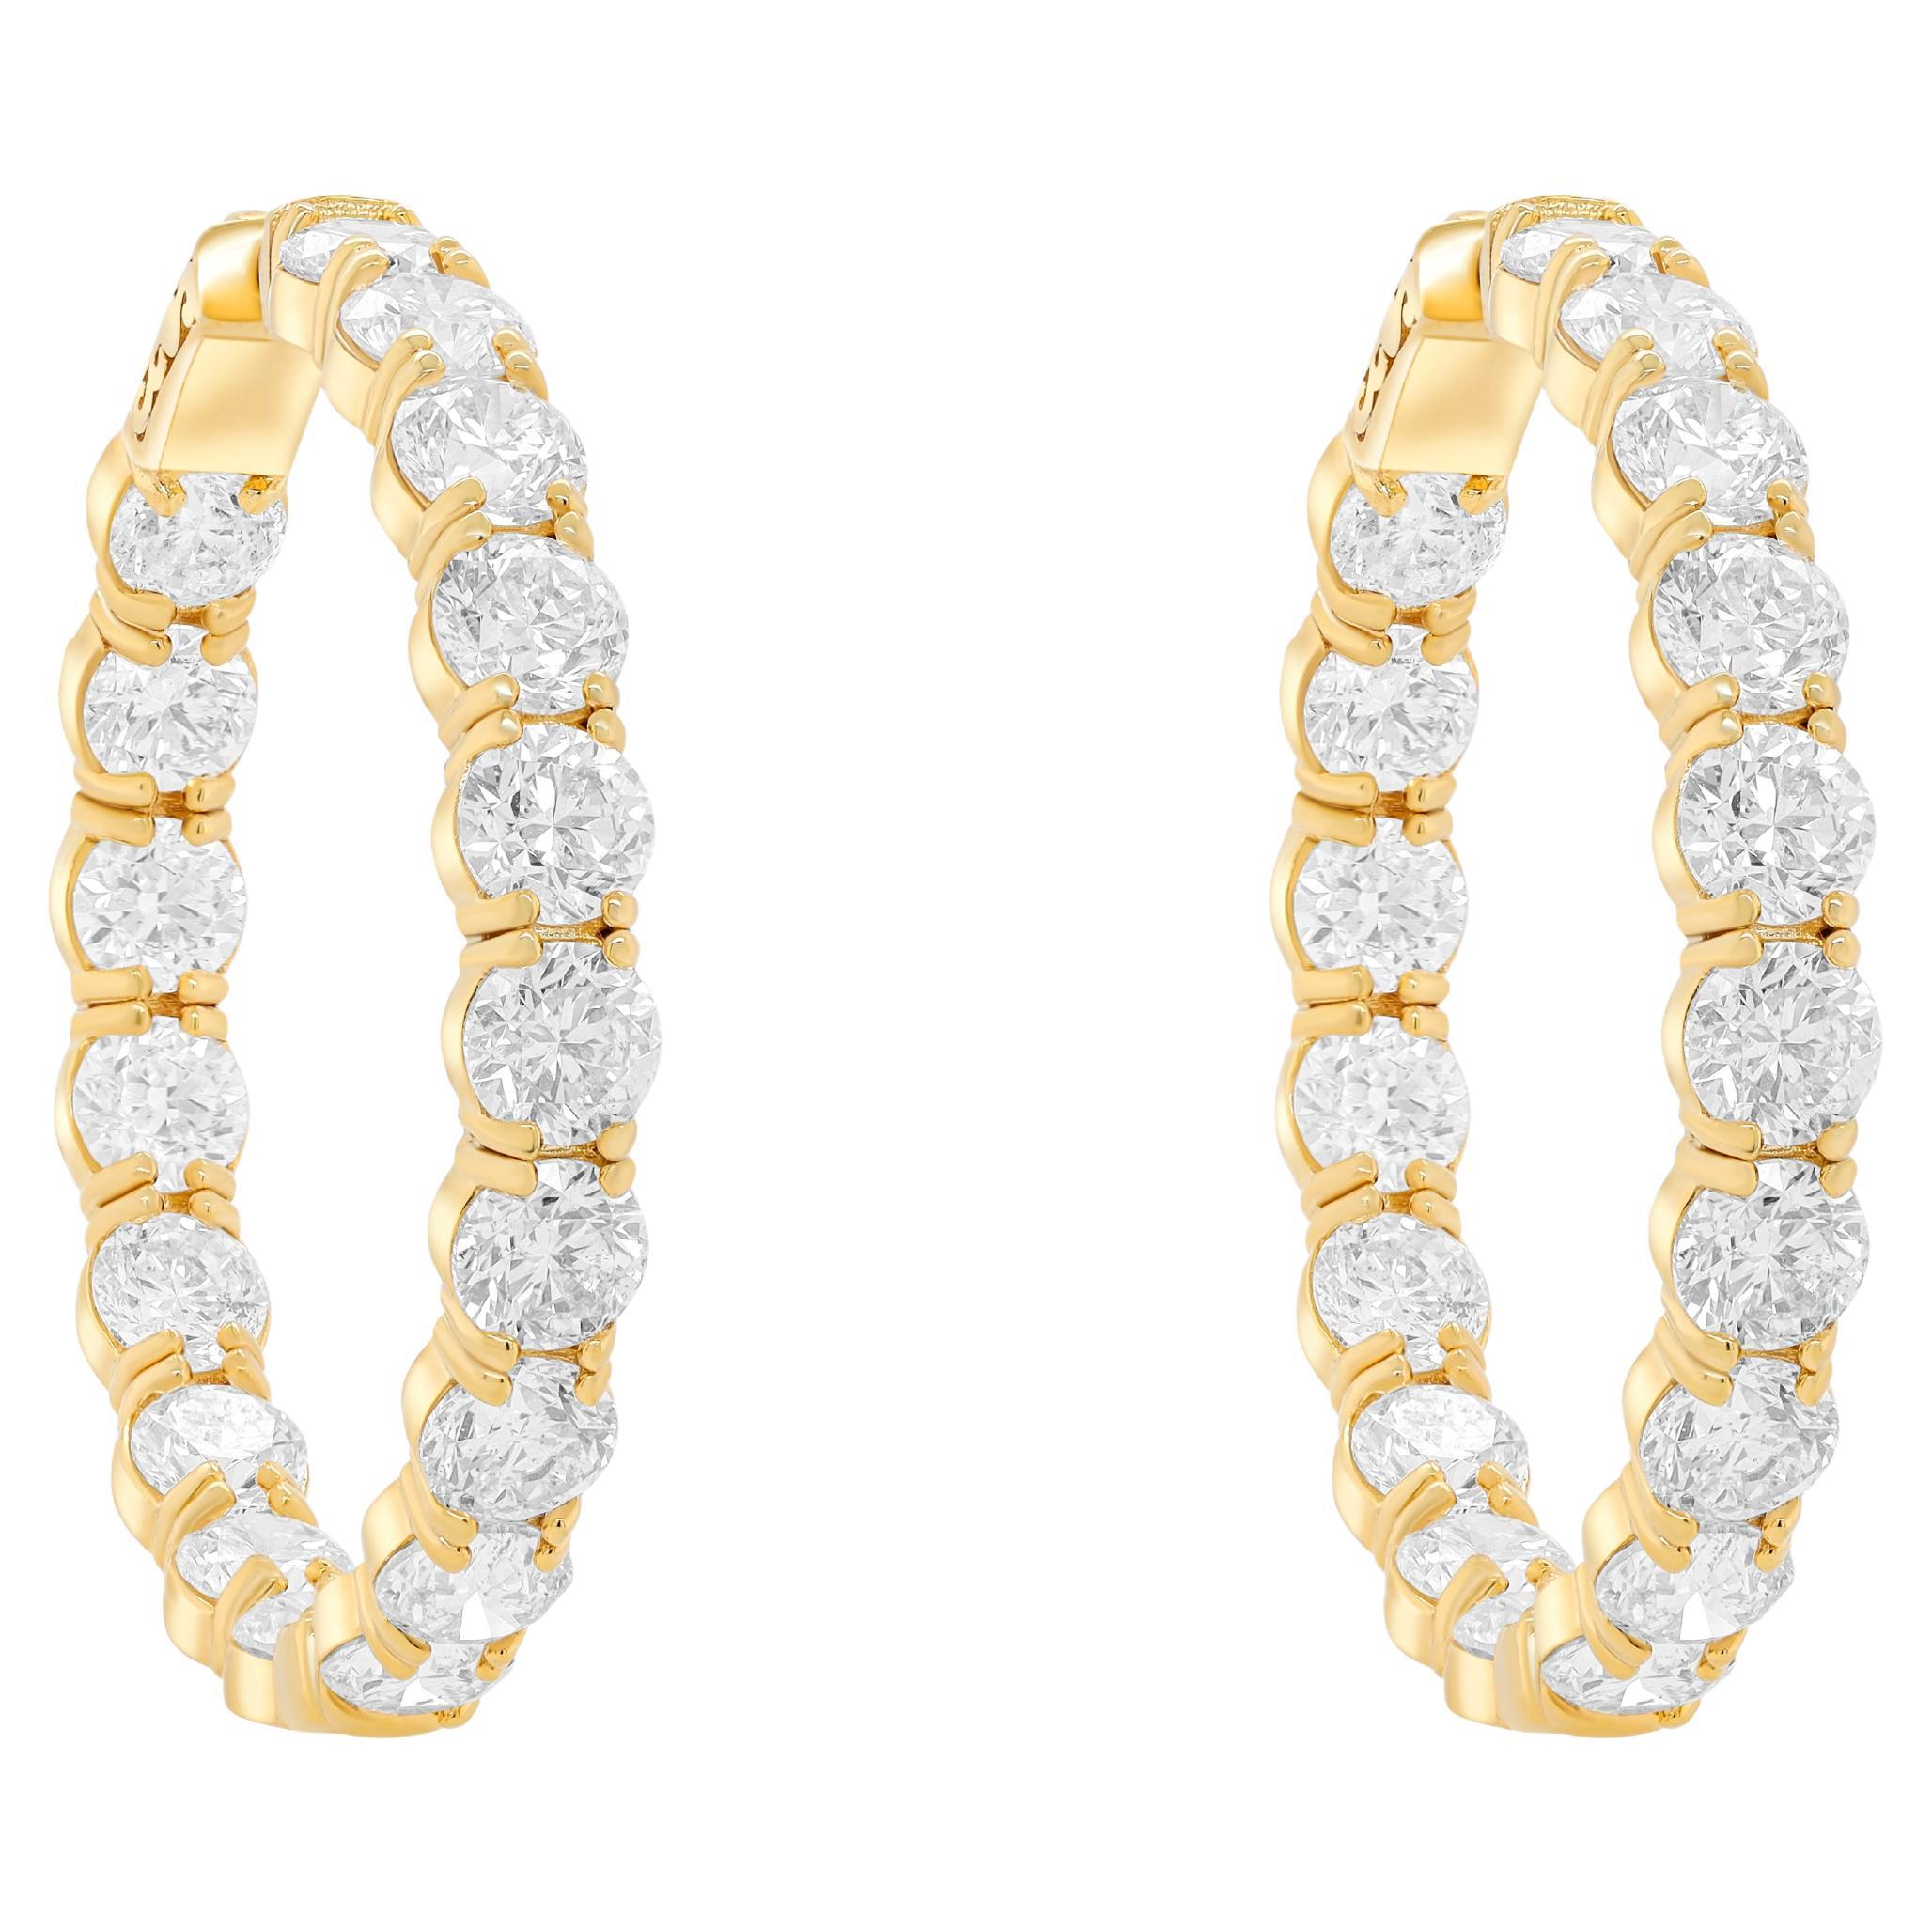 Diana M. 18 kt yellow gold inside-out hoop earrings adorned with 19.05 cts For Sale